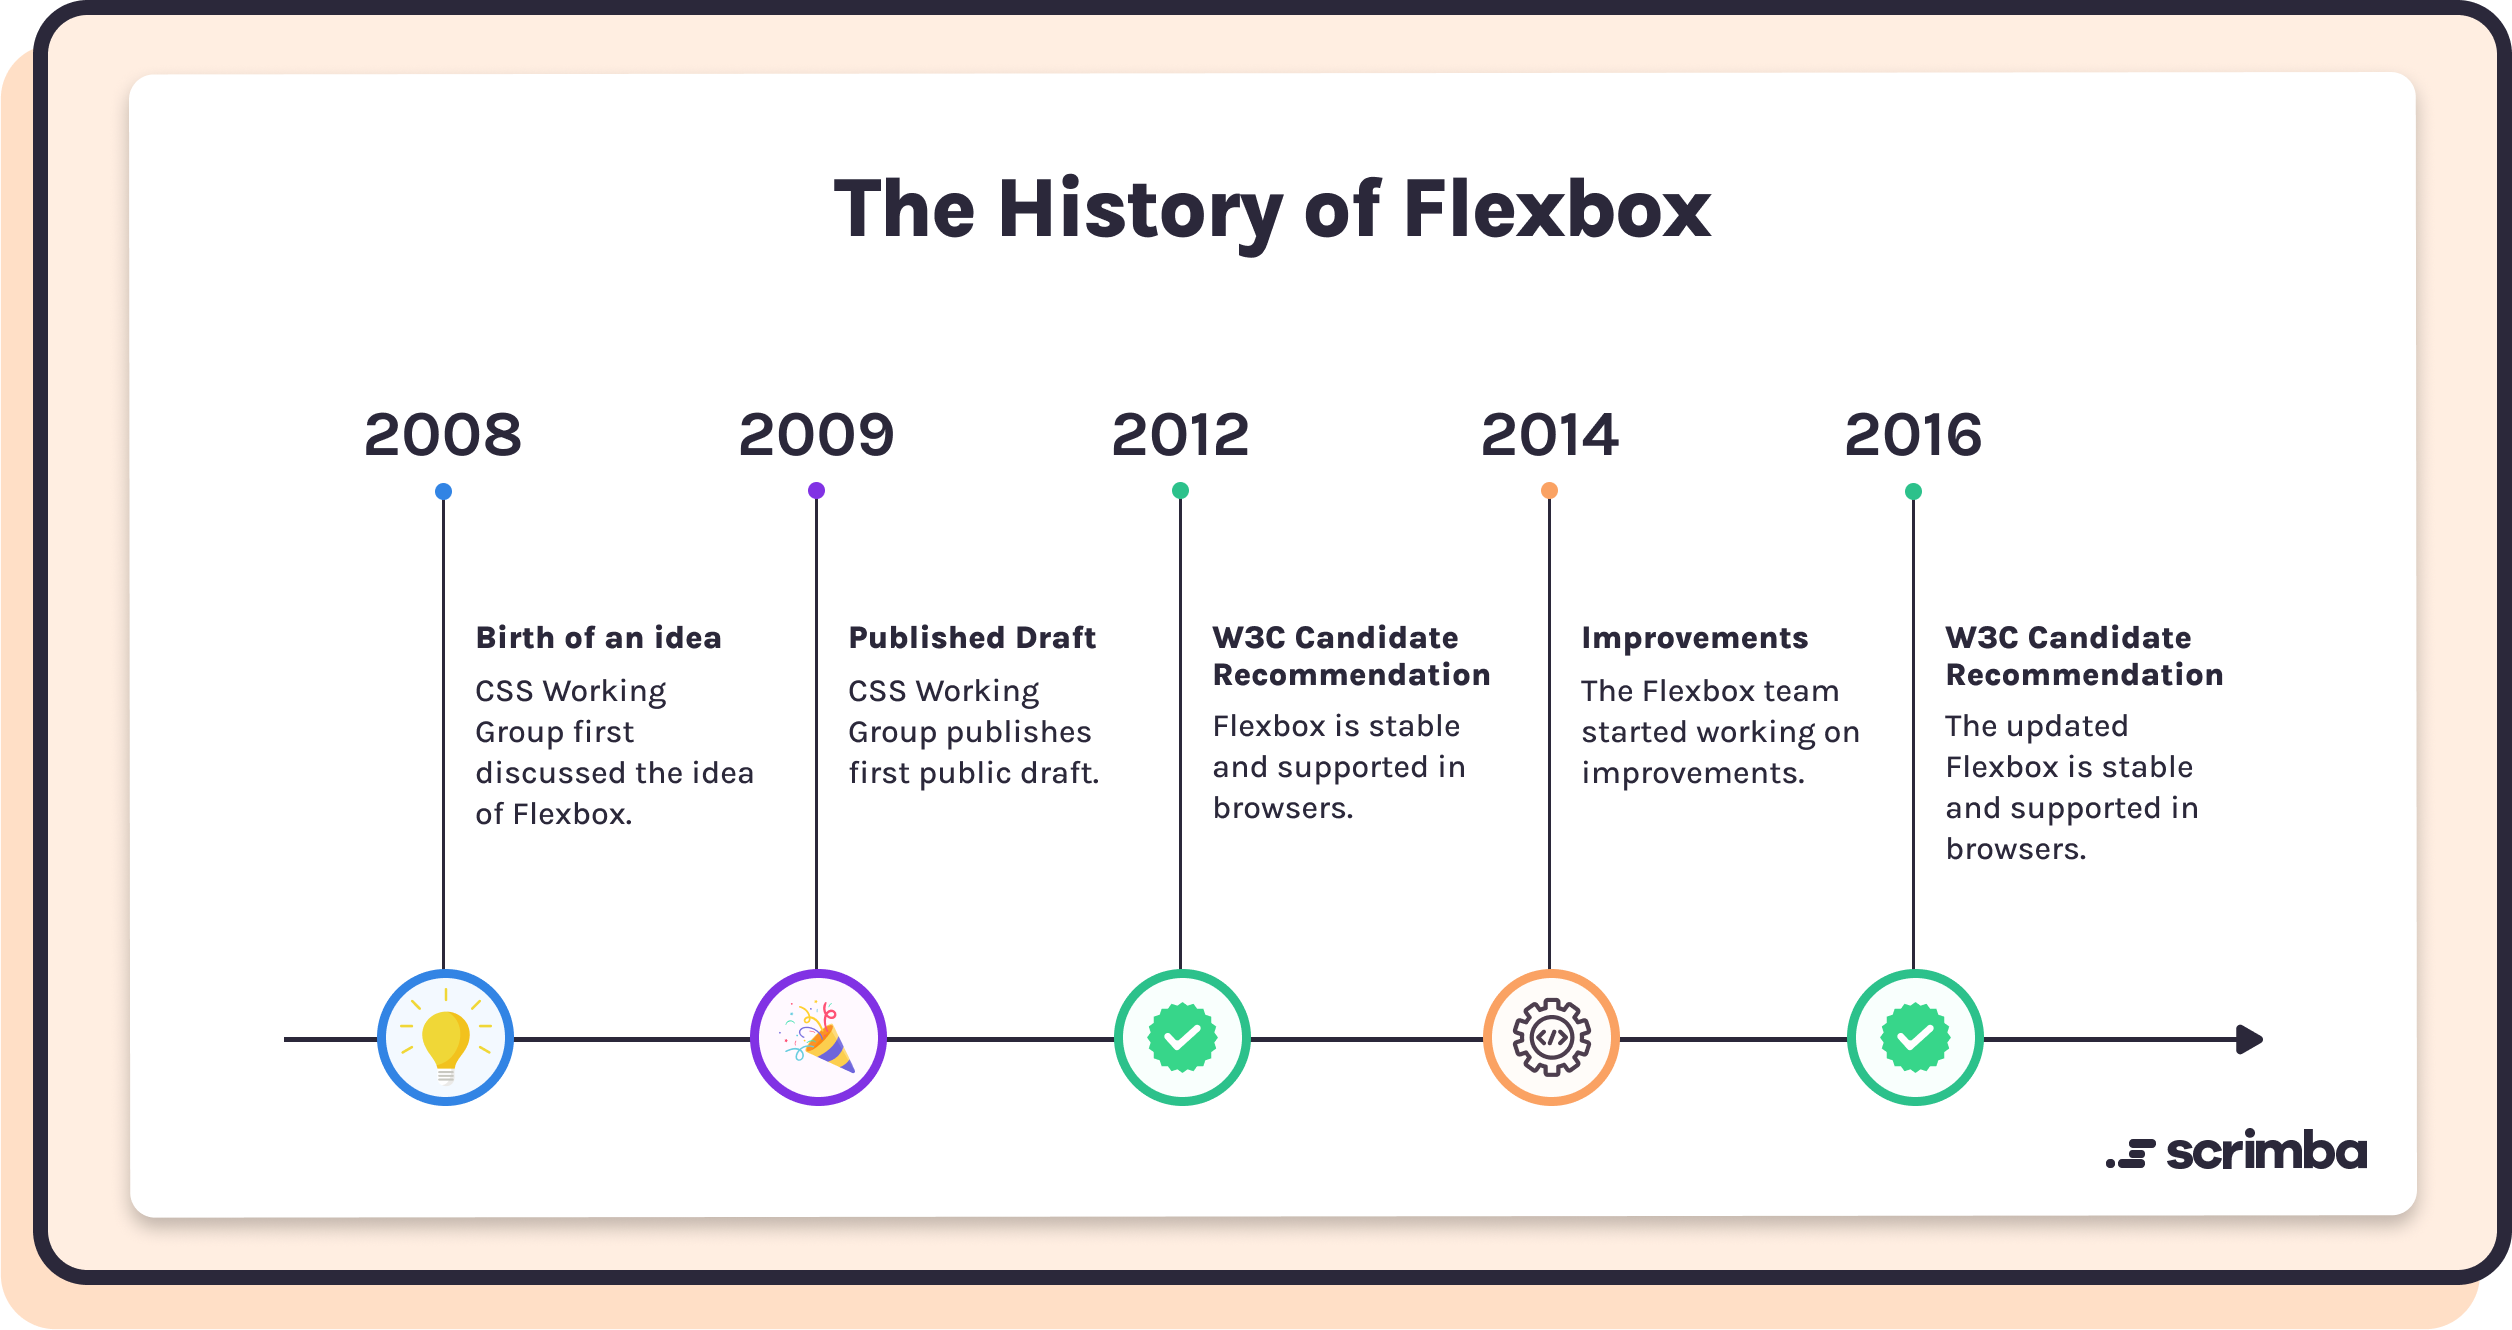 The history of flexbox. 2008, Birth of an idea, CSS Working Group first discussed the idea of Flexbox. 2009, Published Draft, CSS Working Group publishes first public draft. 2012, W3C Candidate Recommendation, Flexbox is stable and supported in browsers. 2014, Improvements, The Flexbox team started working on improvements. 2016, W3C Candidate Recommendation, Flexbox is updated and is stable and supported in browsers.